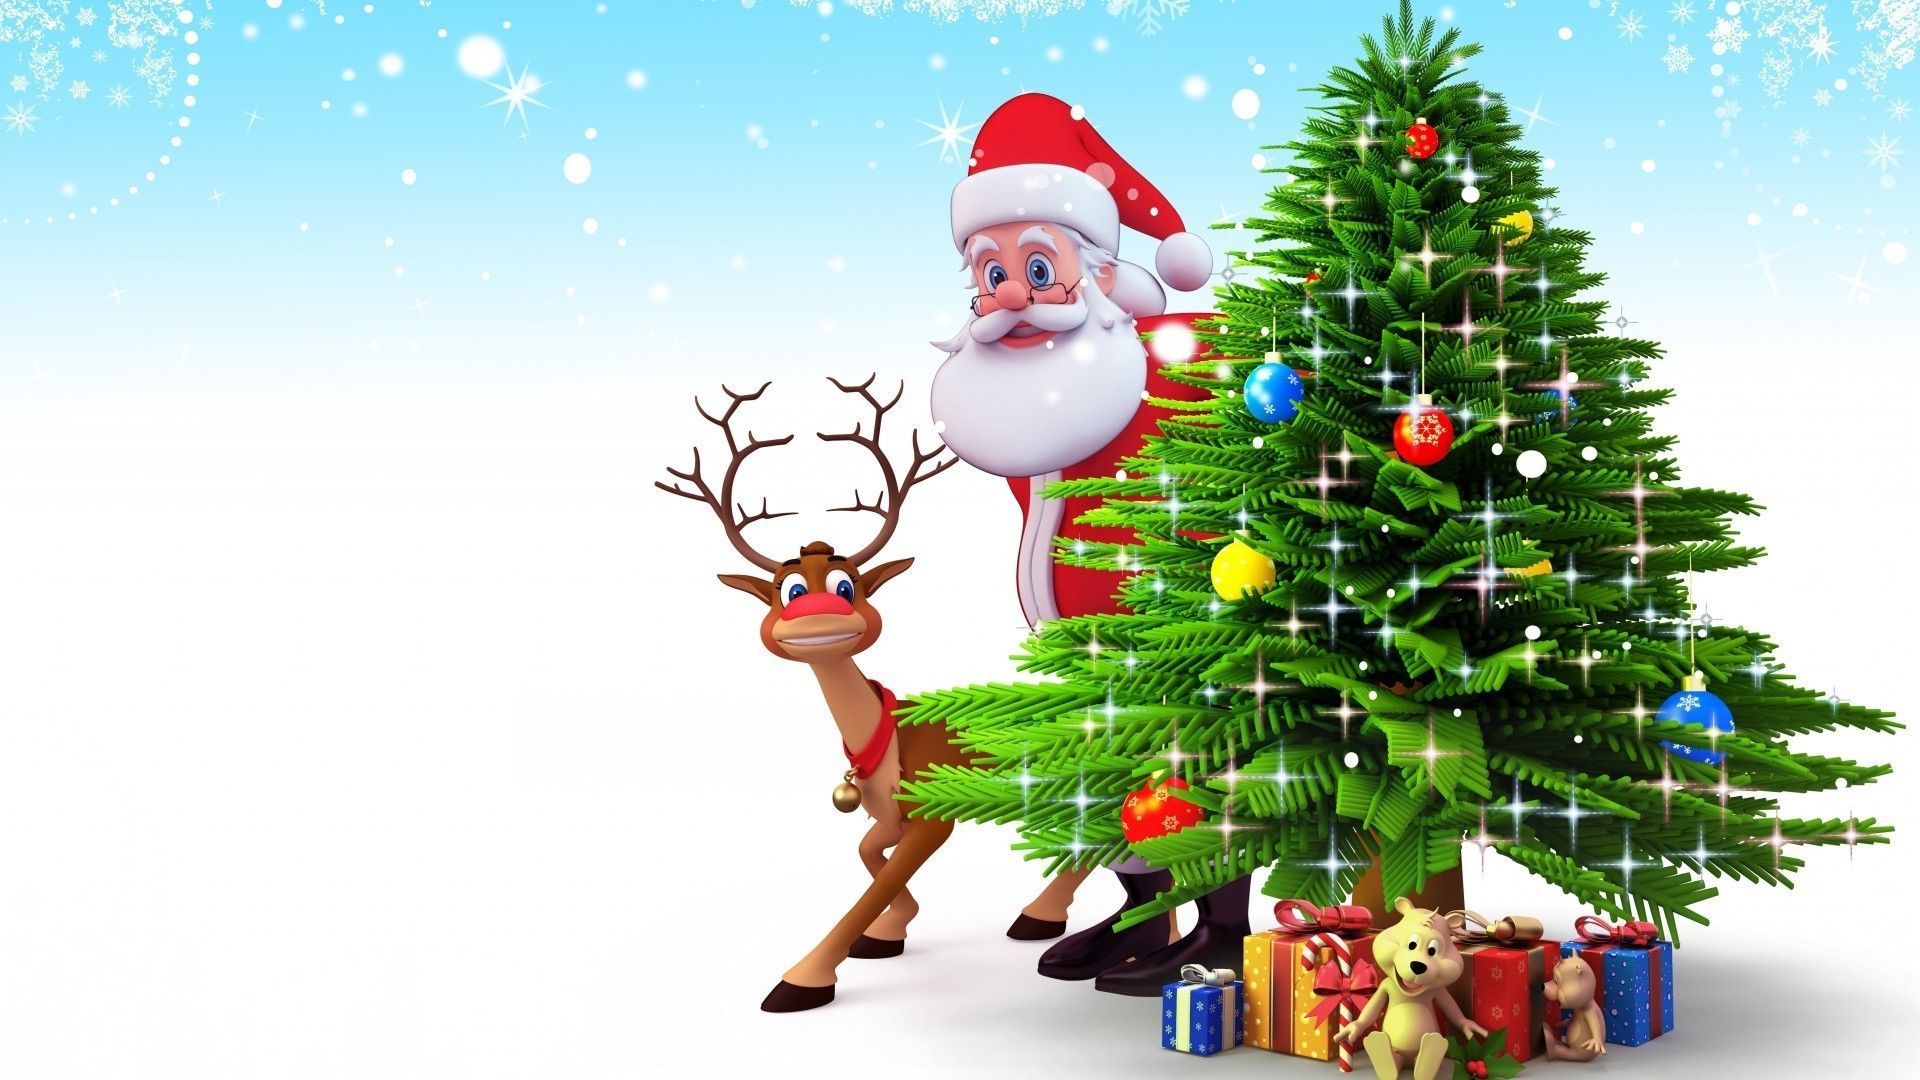 Christmas tree with gifts, Santa Claus and reindeer